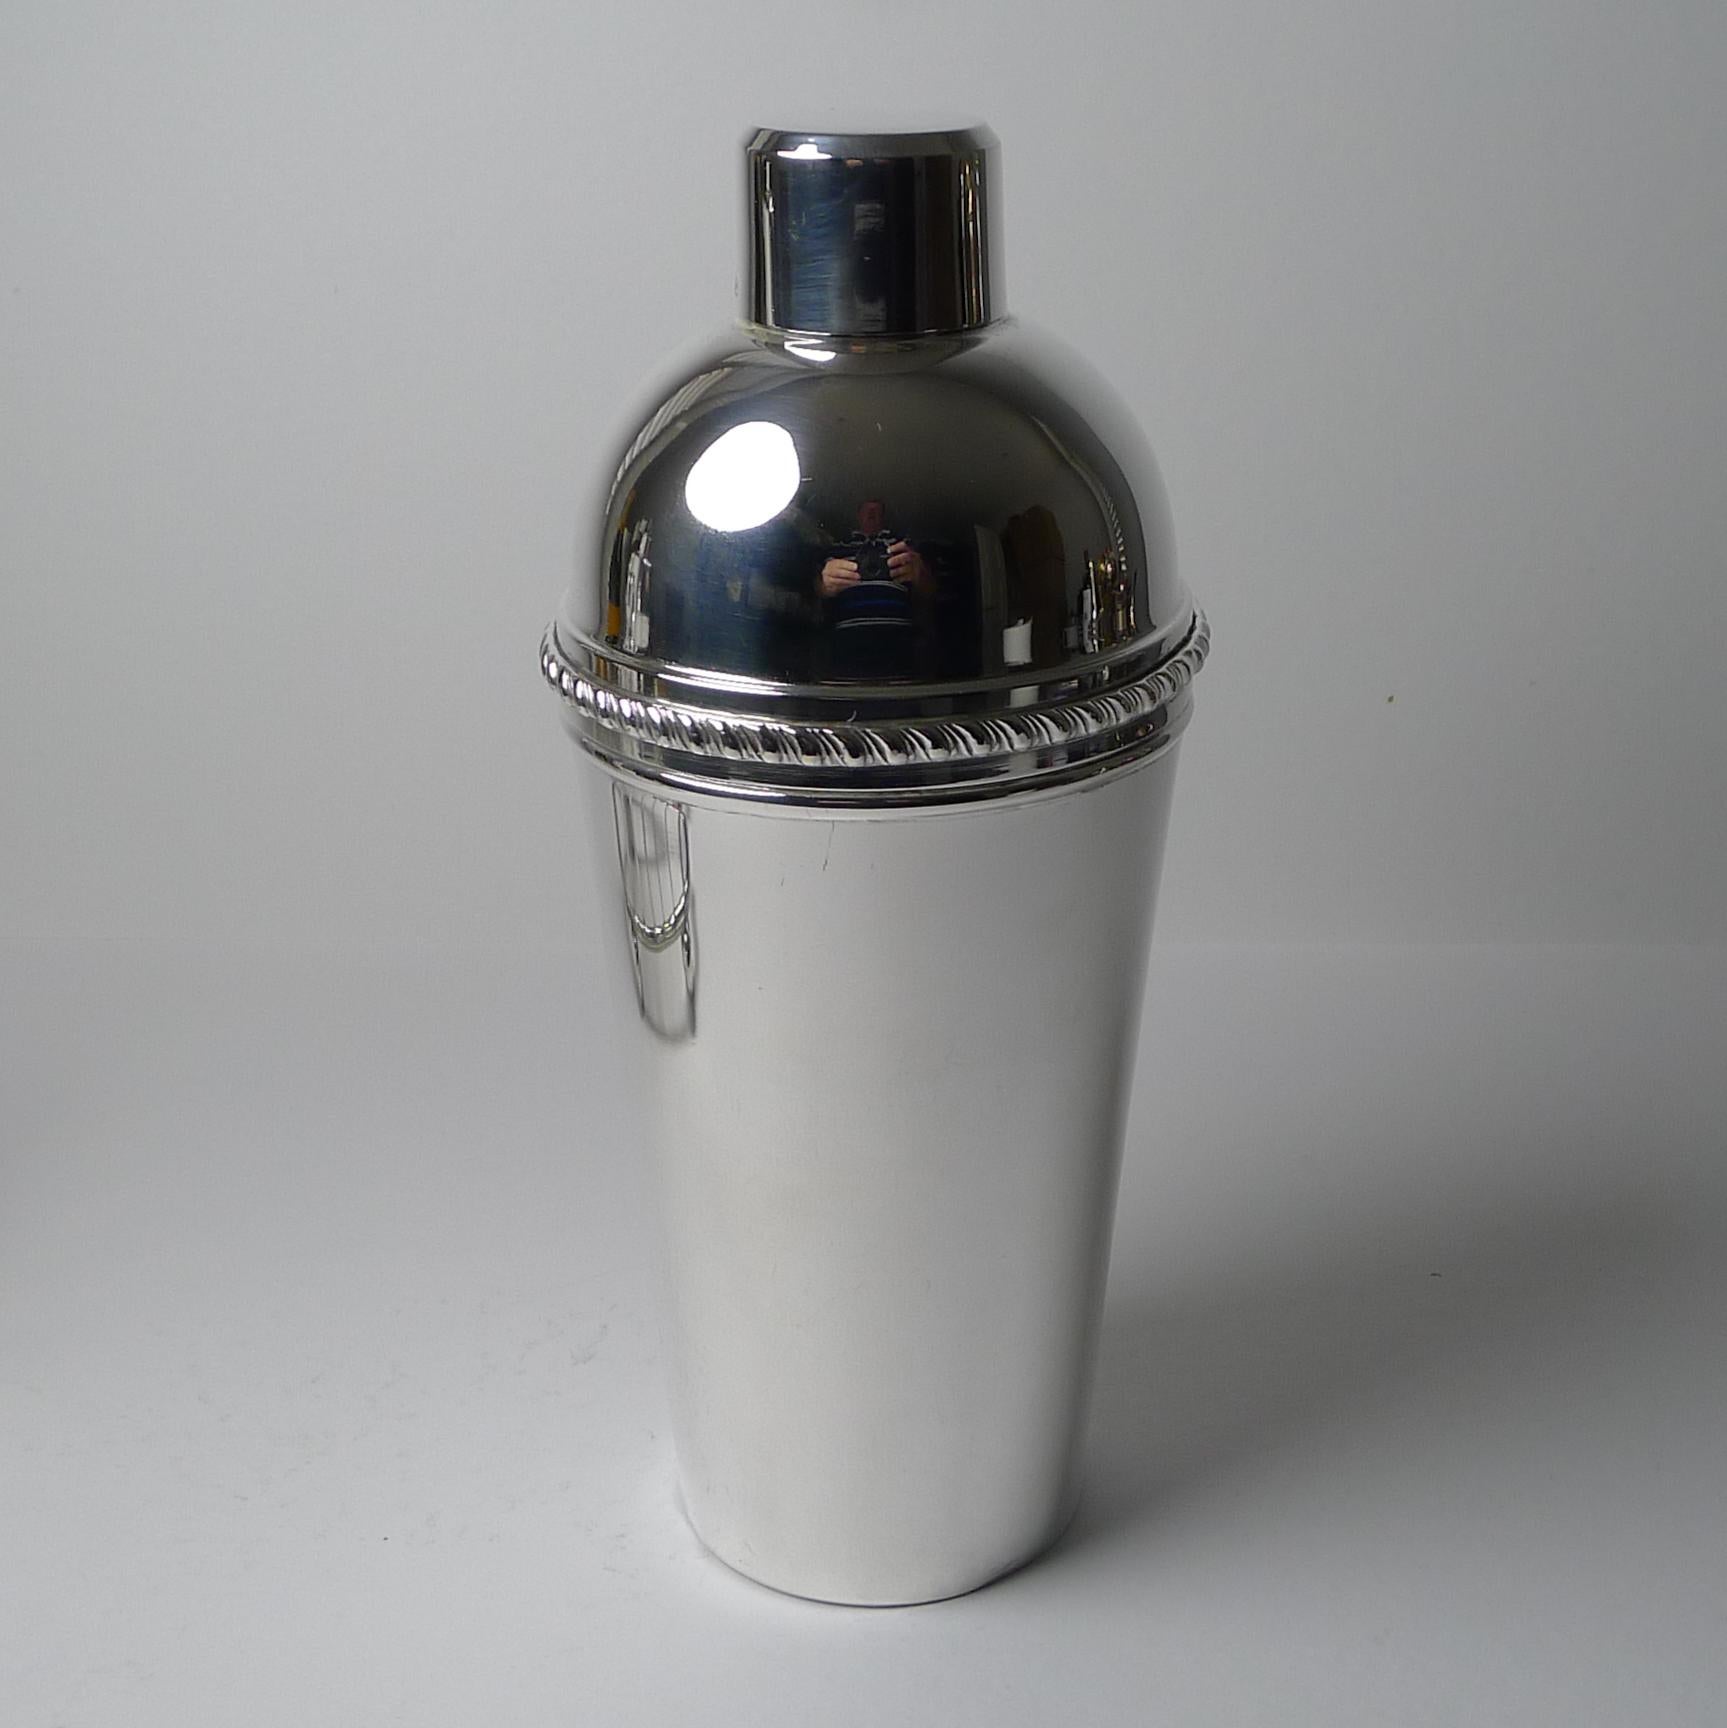 A late Art Deco cocktail shaker dating to c.1940/1950 made from silver plate, sourced and originating in Italy.

What makes this example highly sought-after is the integral lemon squeezer or reamer inside the top section; always desirable and hard